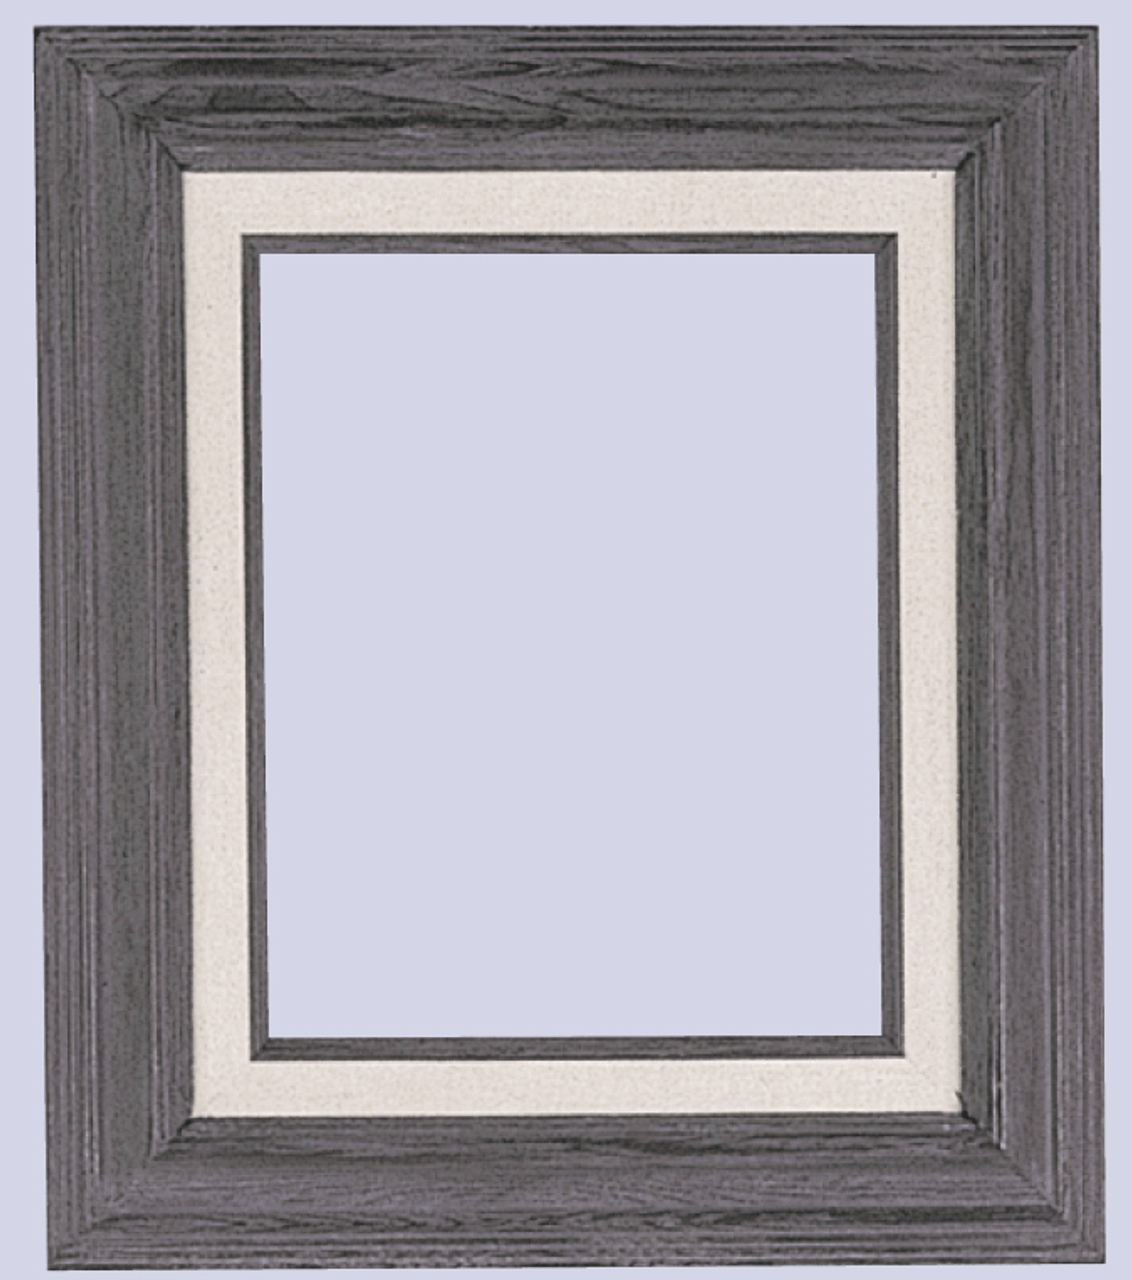 3 Inch Econo Wood Frames With Linen Liners: 7X11